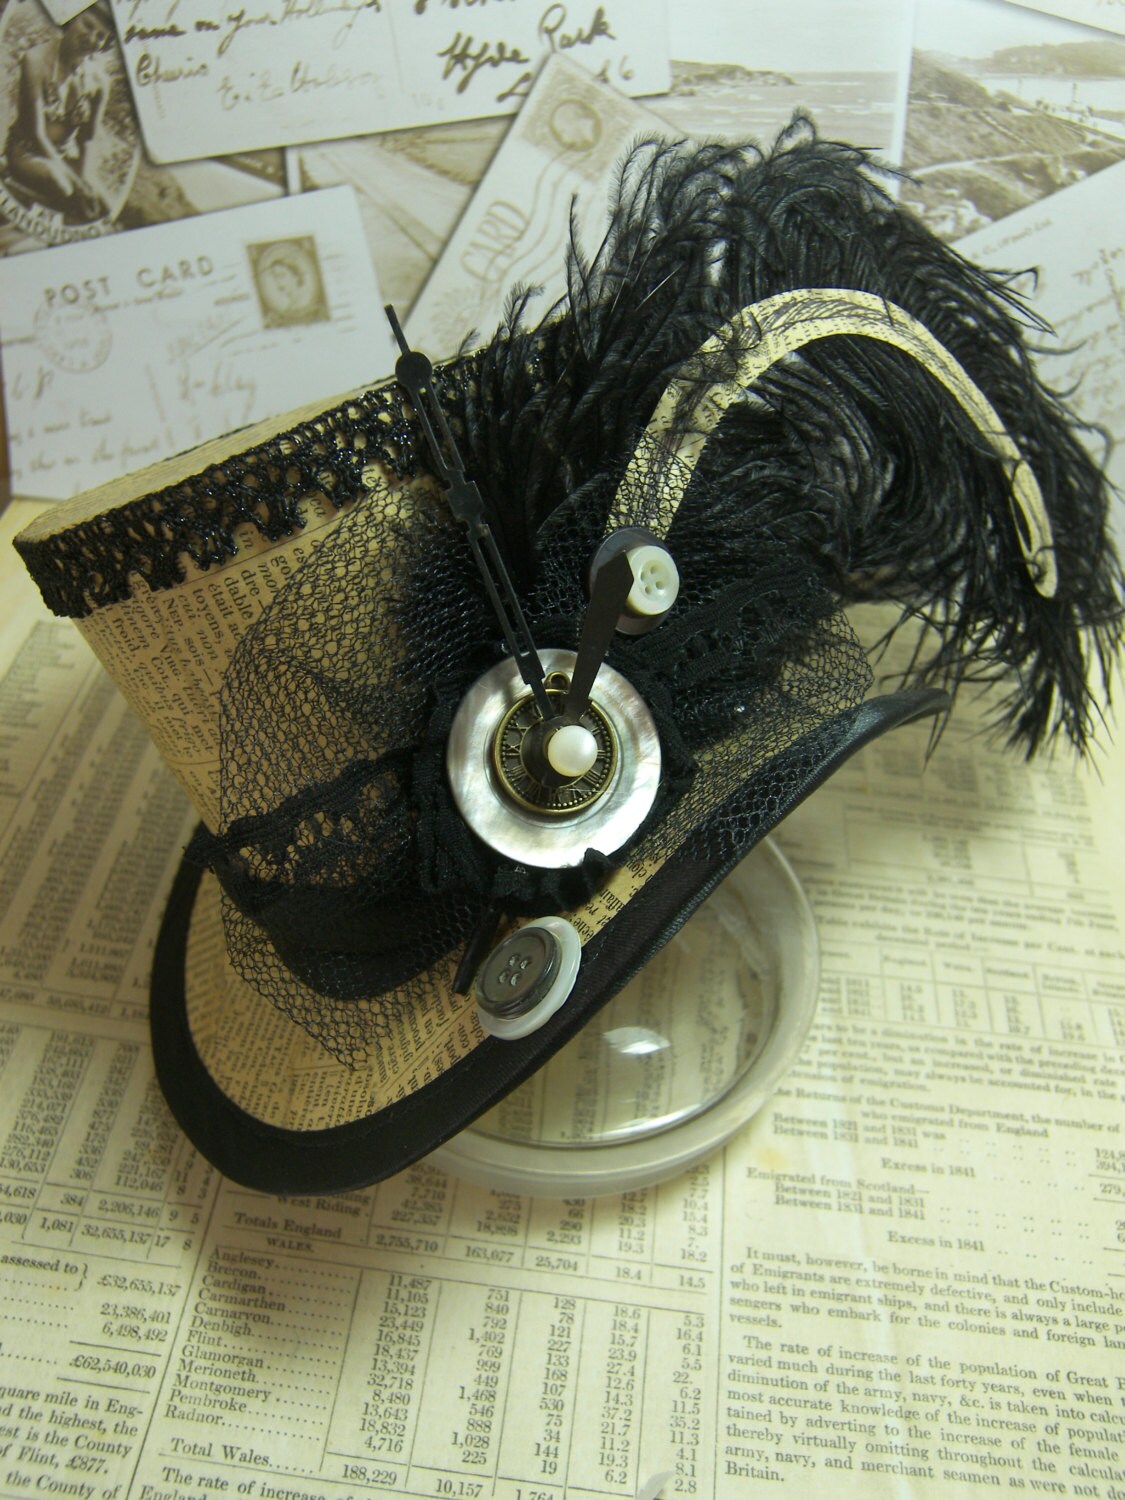 The Timeless Classic - decoupage mini top hat made with antique paper and vintage trimmings